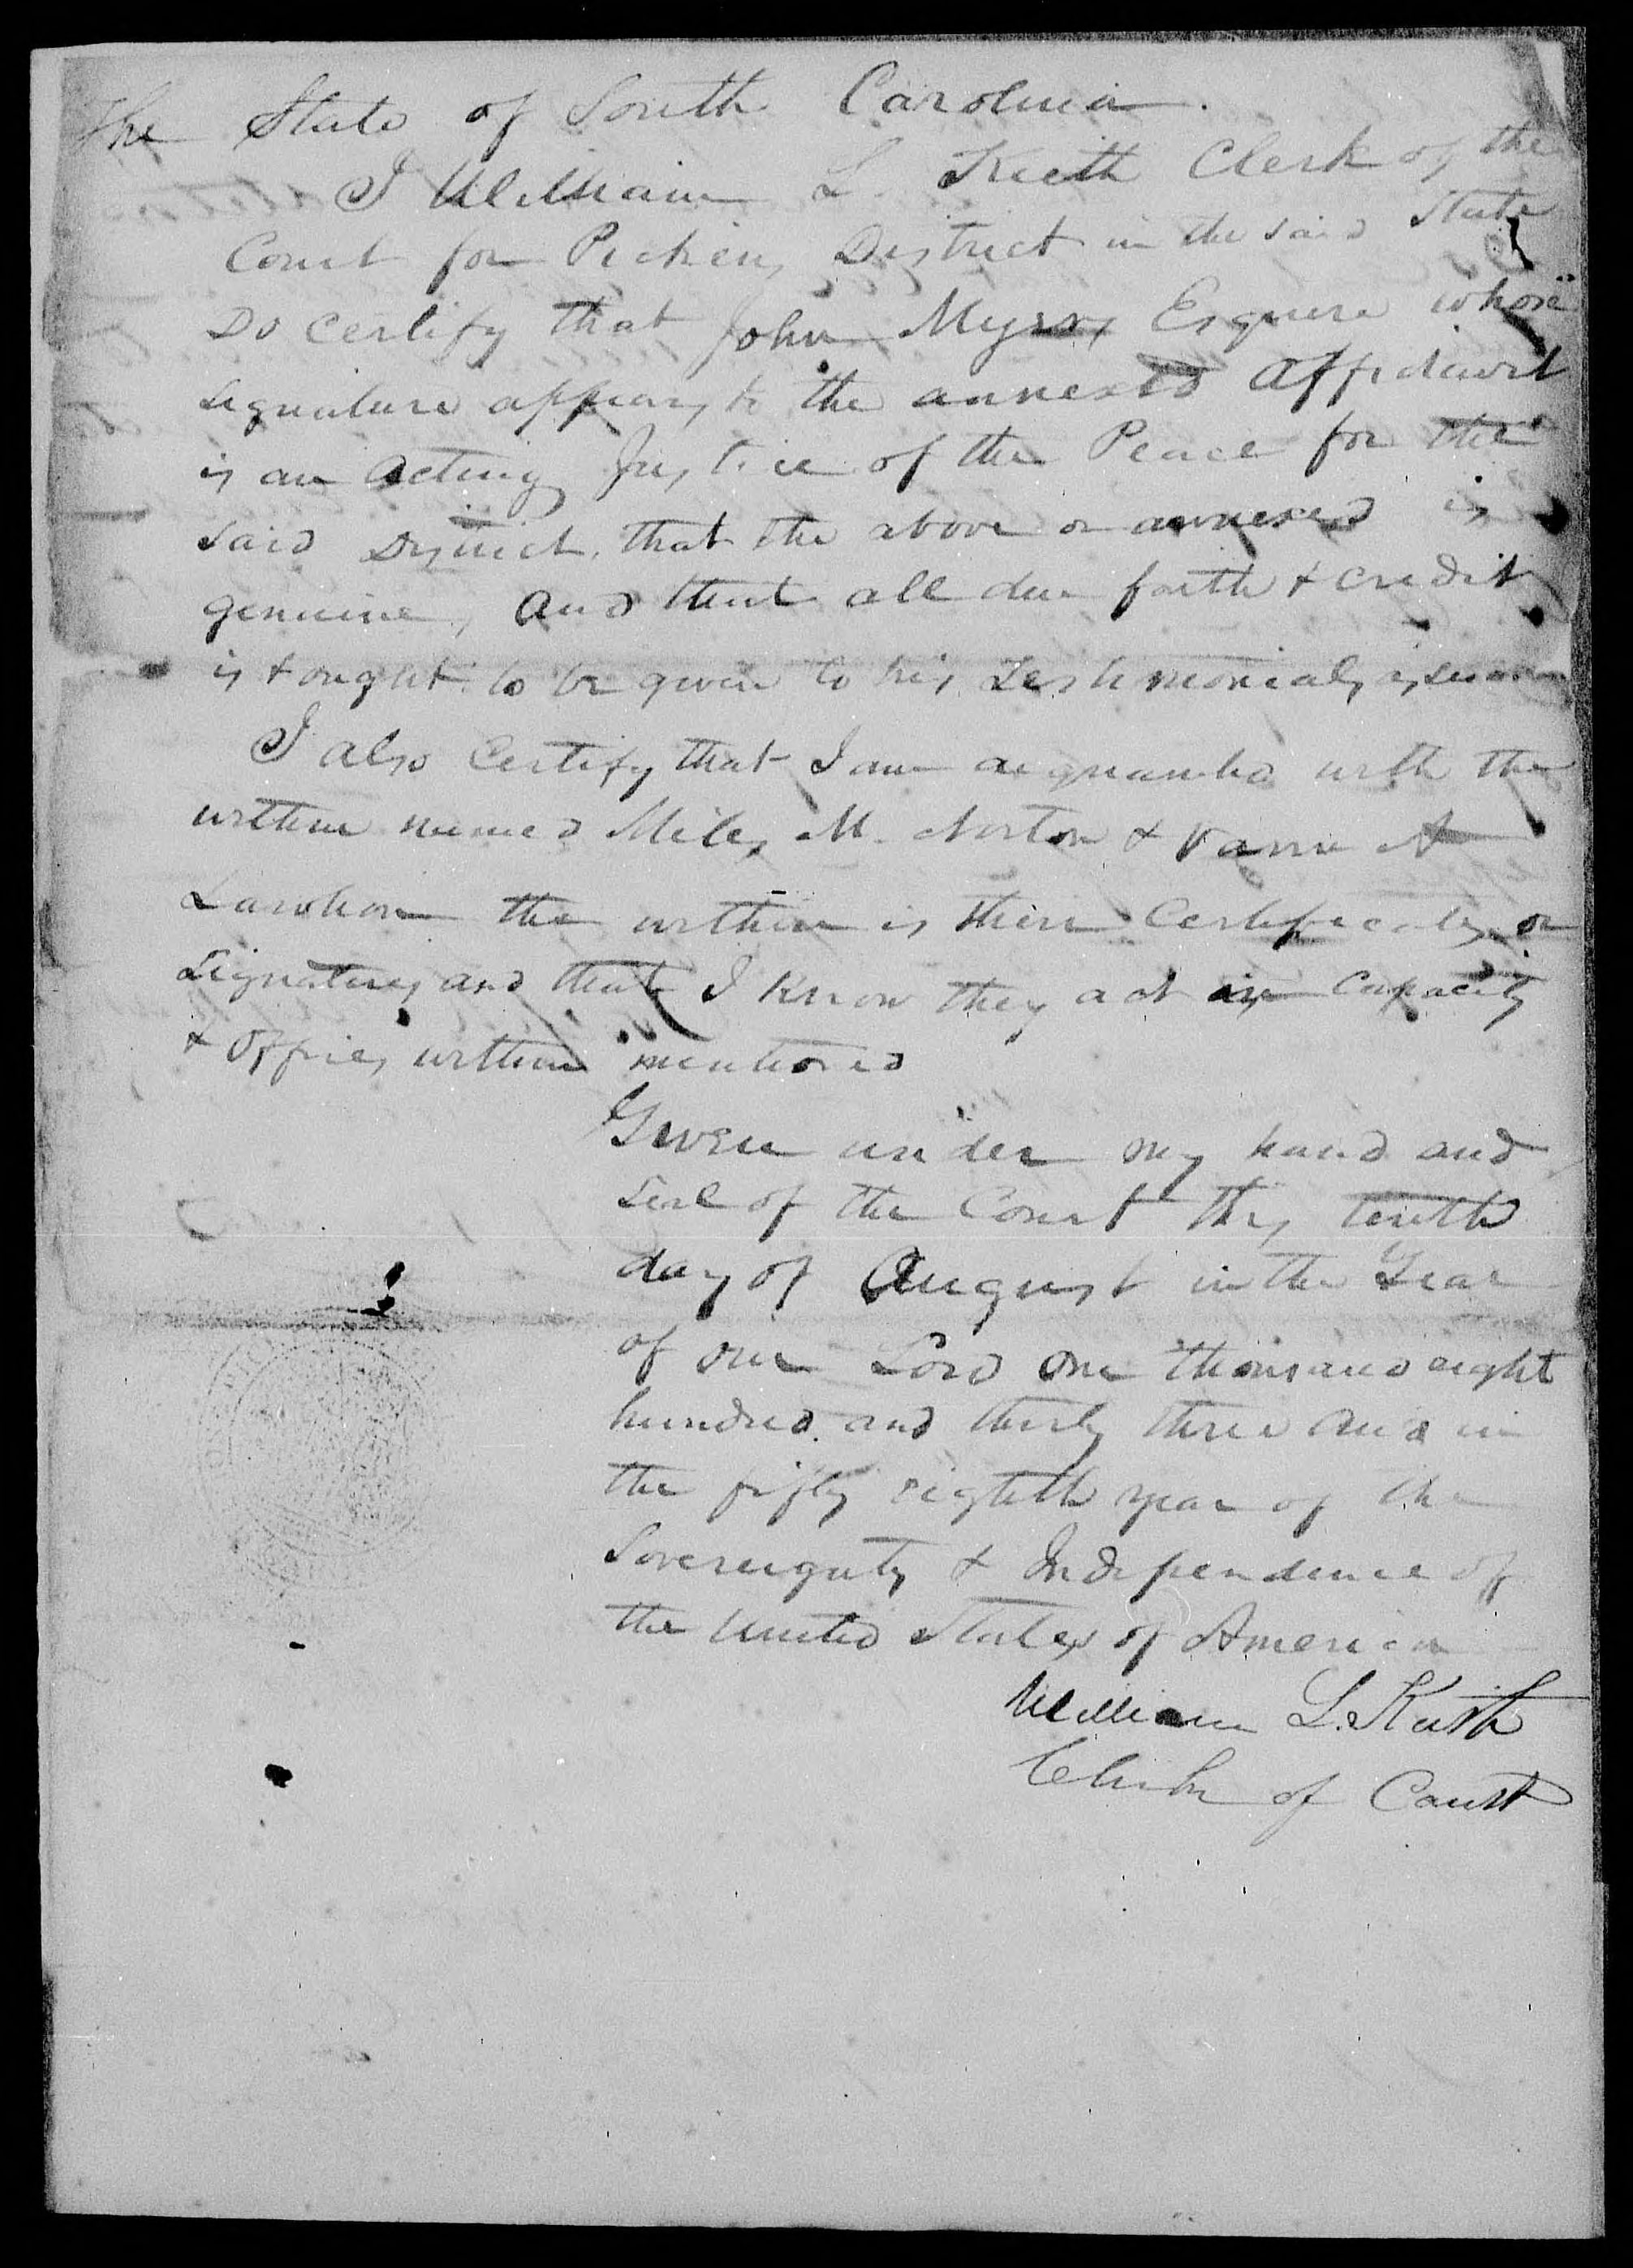 Application for a Veteran's Pension from William Guest, 9 August 1833, page 3